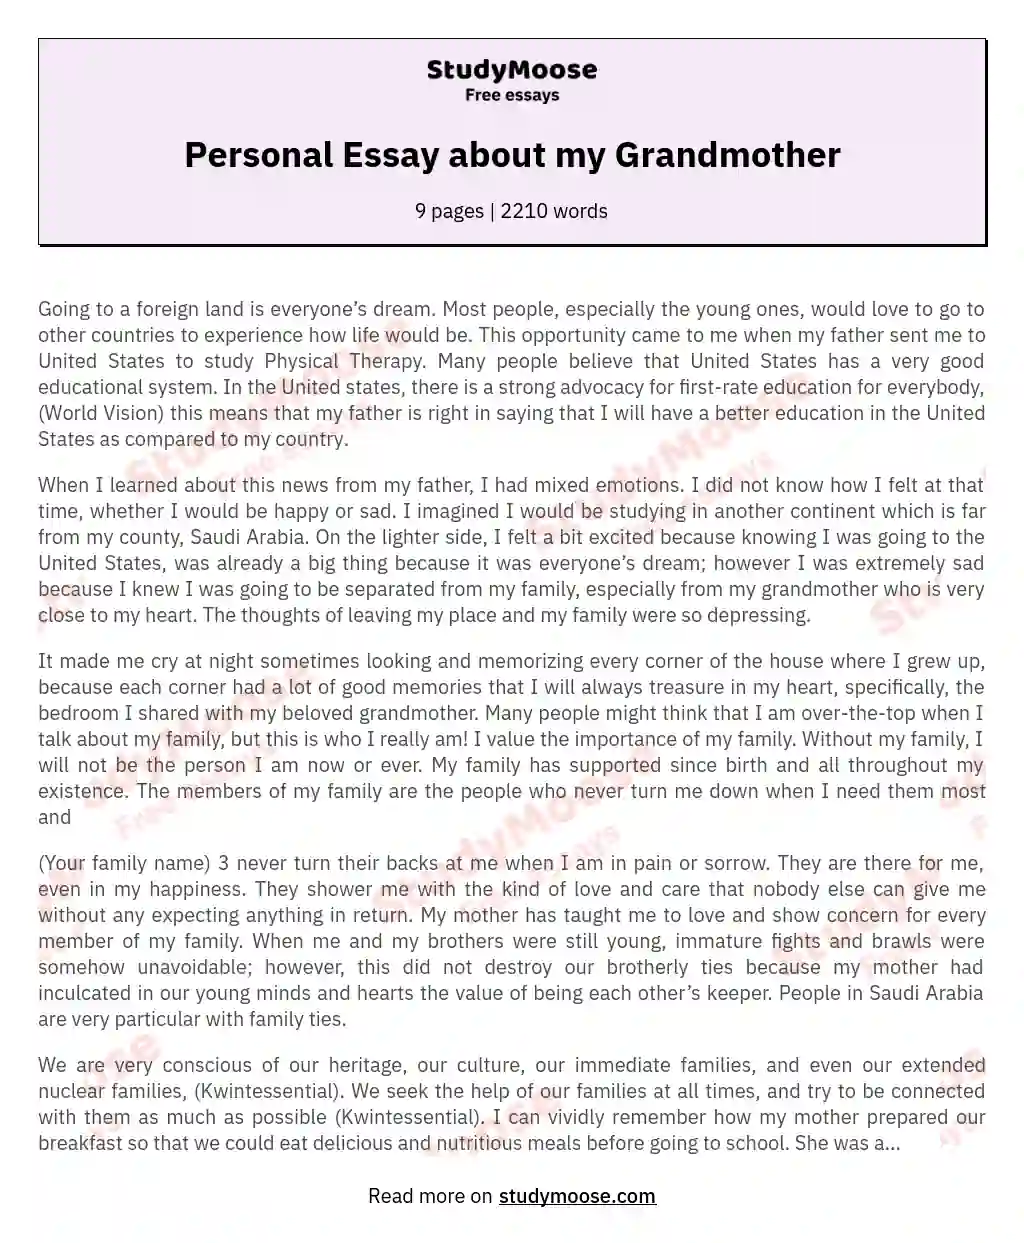 Personal Essay about my Grandmother